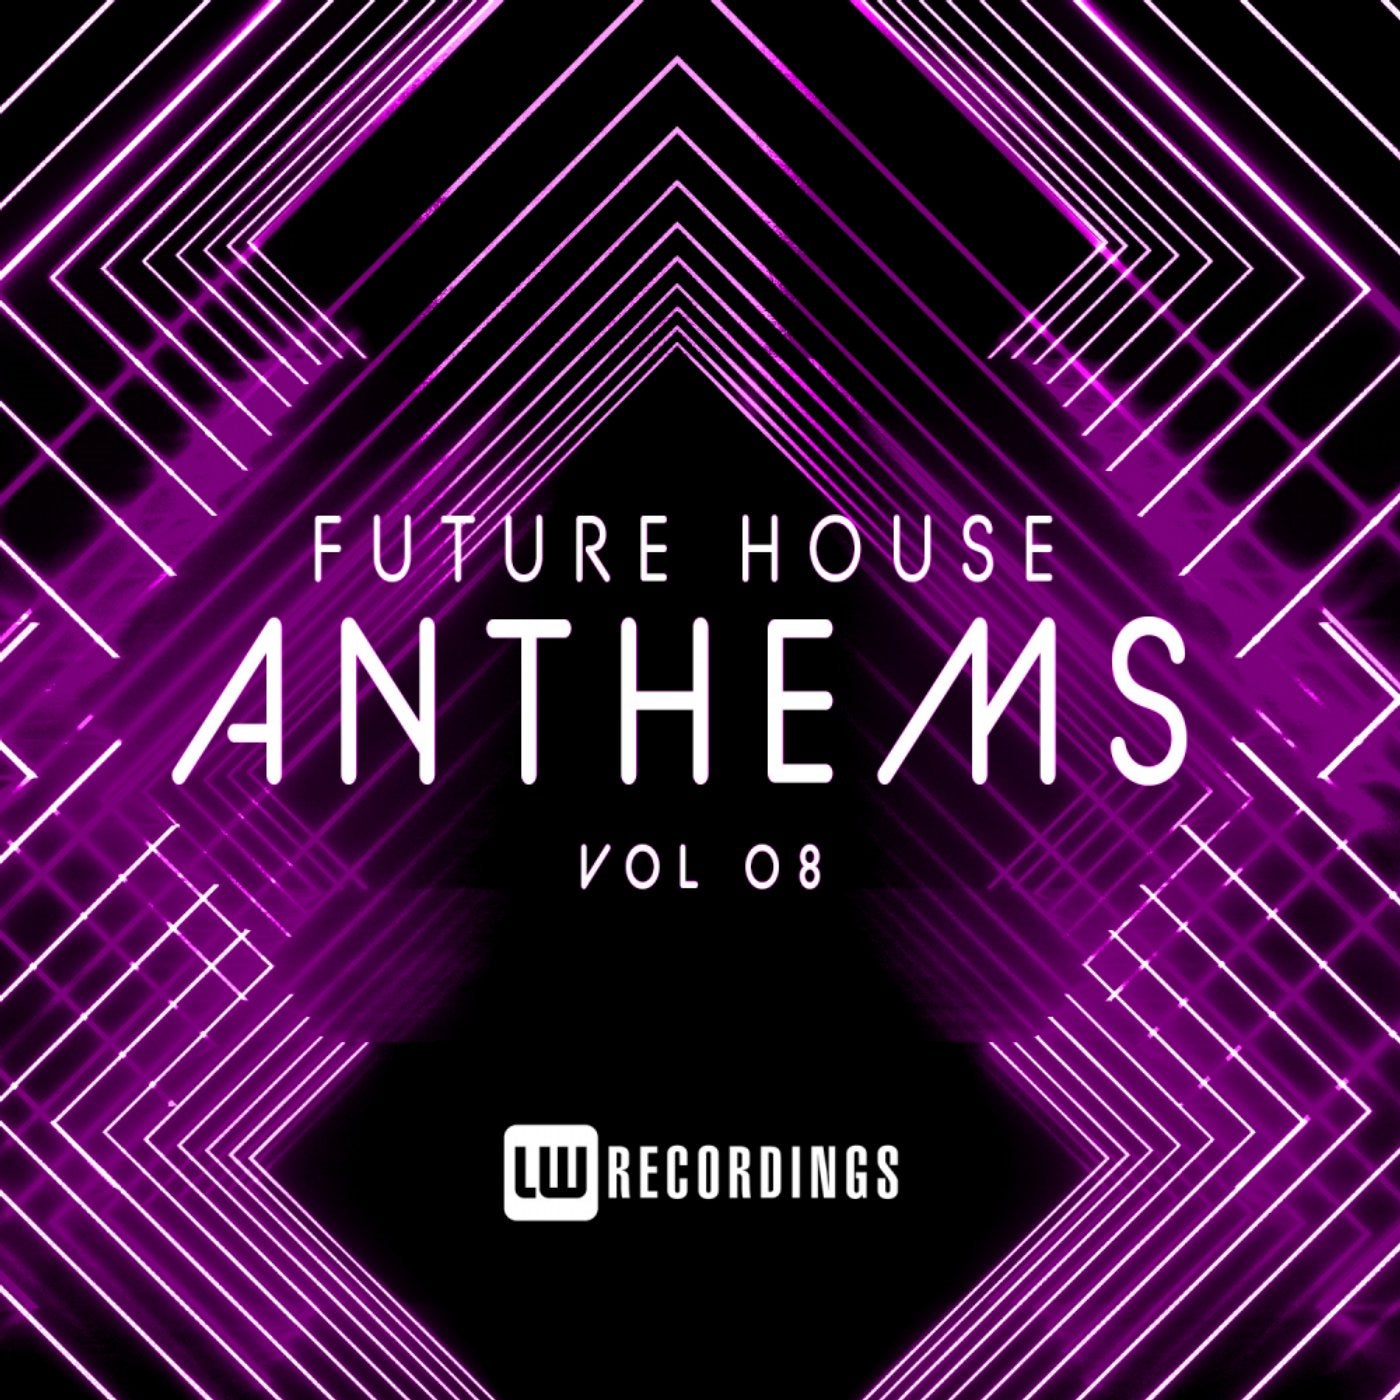 Future House Anthems, Vol. 08